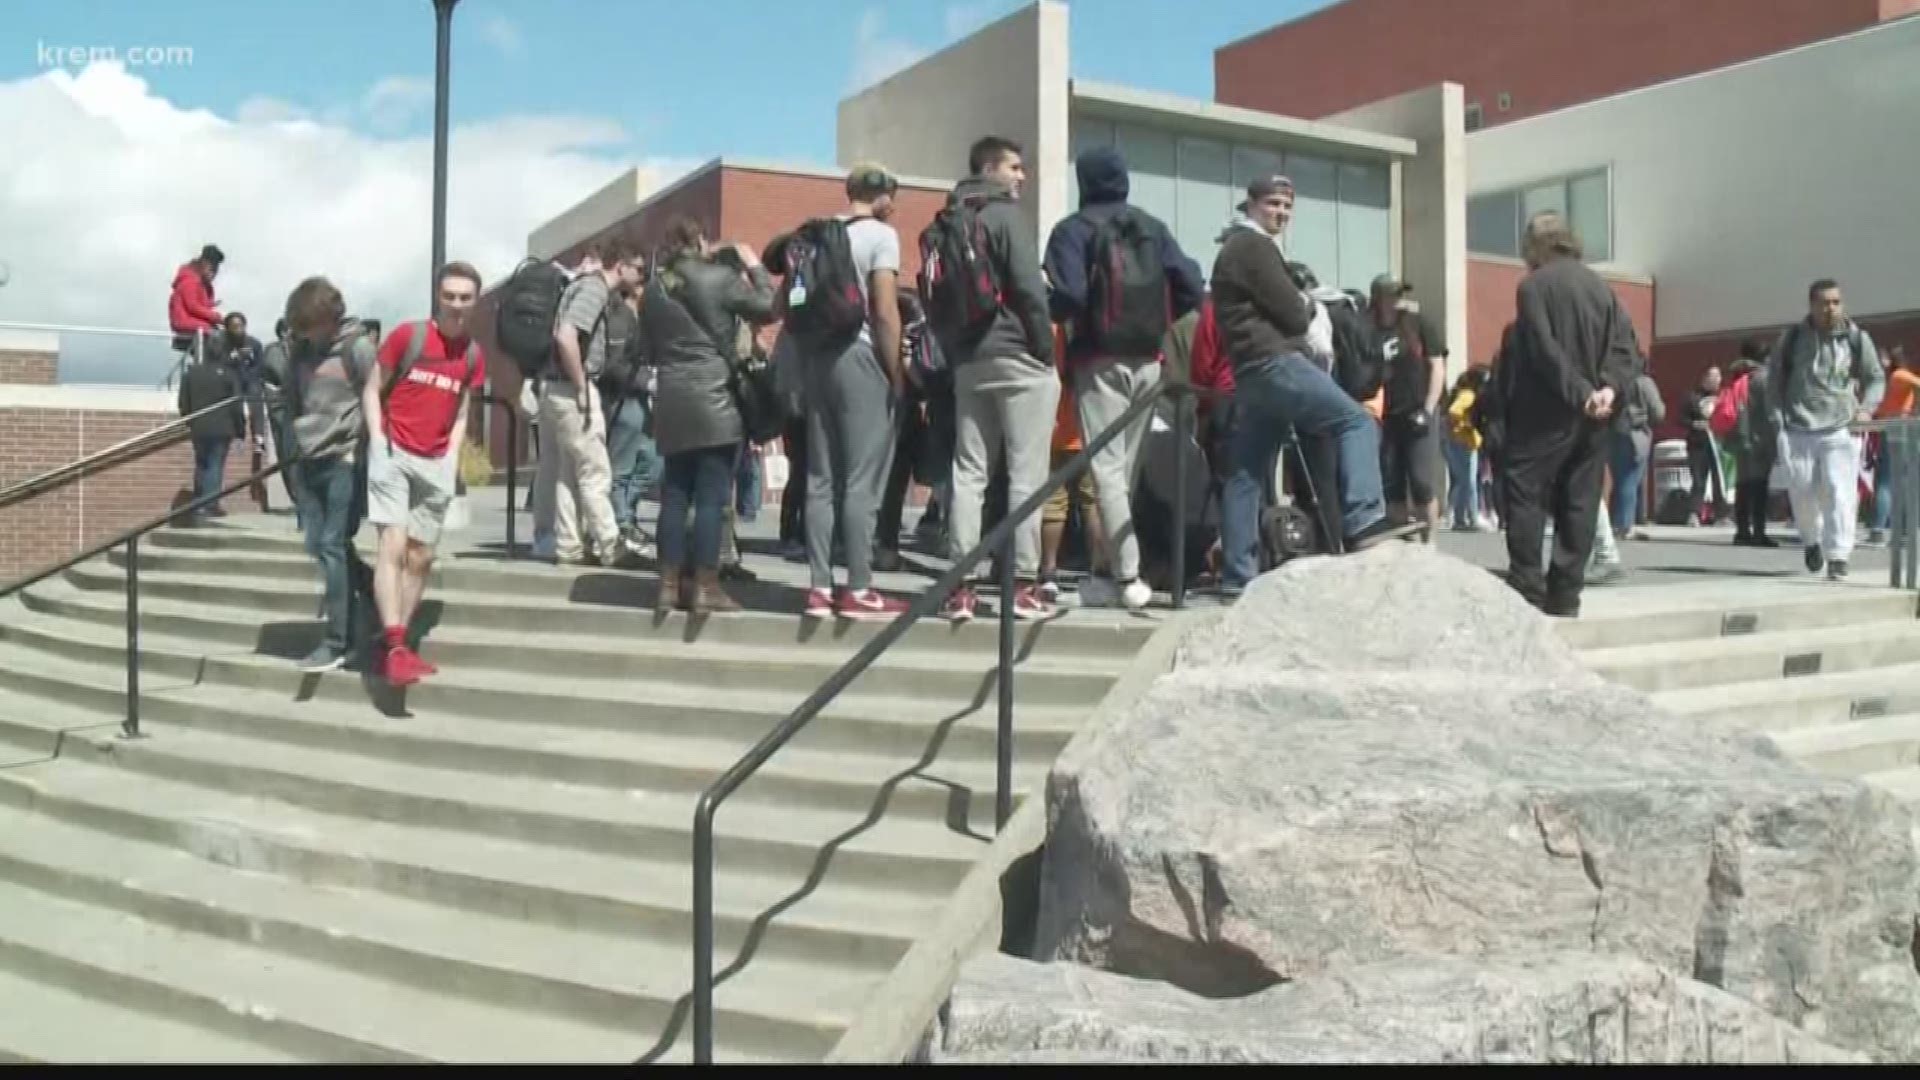 The Washington State University College Republicans called the event a "First and Second Amendment demonstration."